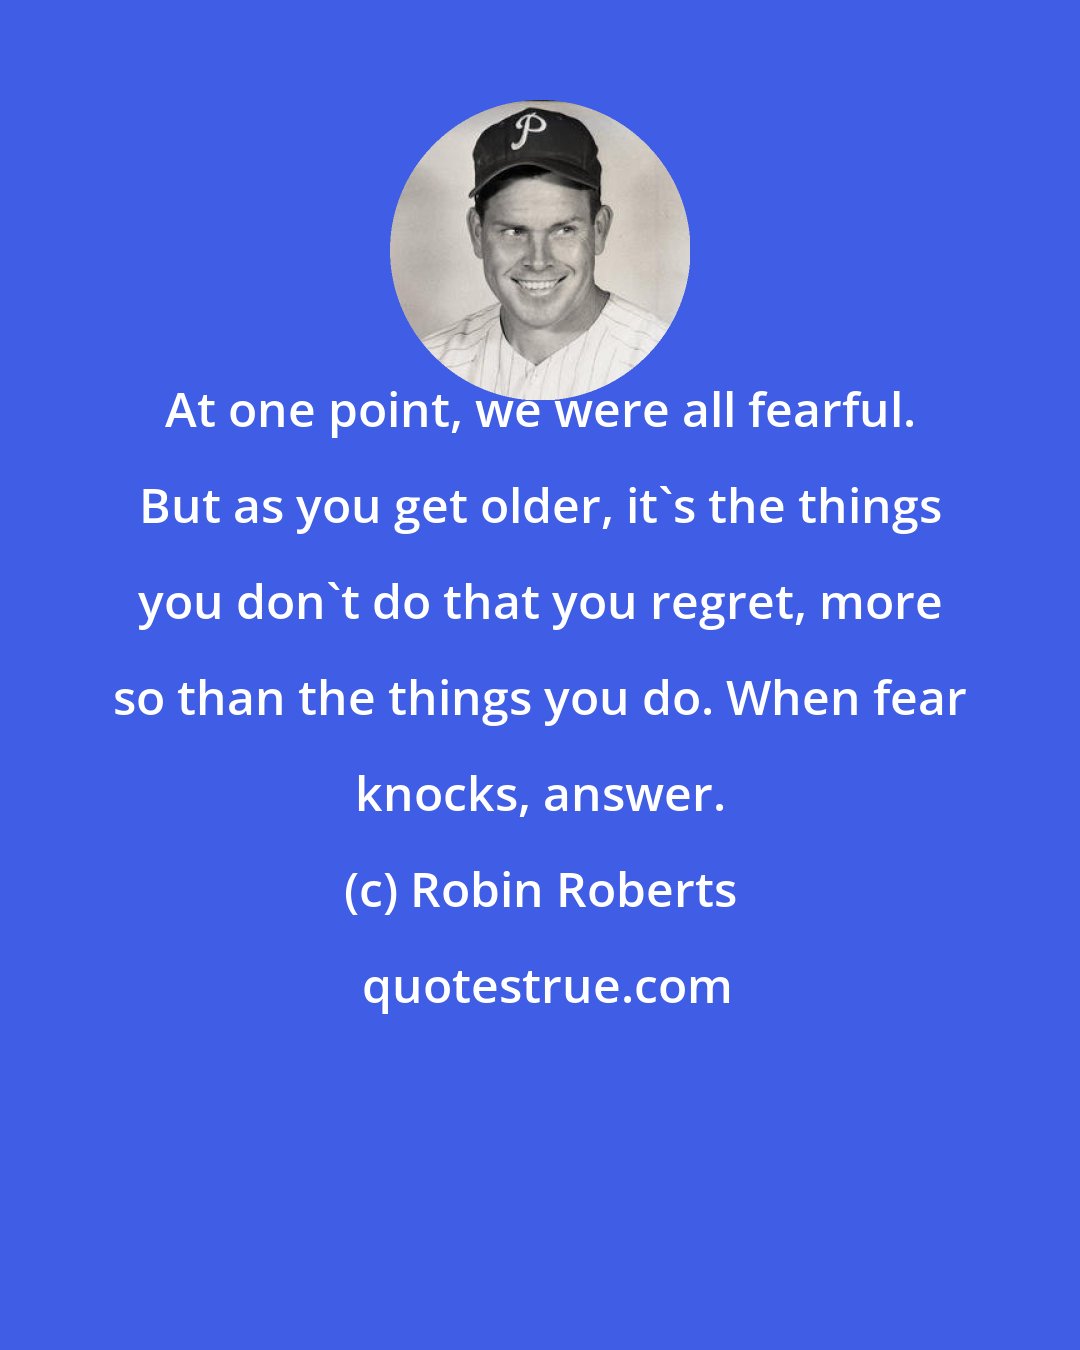 Robin Roberts: At one point, we were all fearful. But as you get older, it's the things you don't do that you regret, more so than the things you do. When fear knocks, answer.